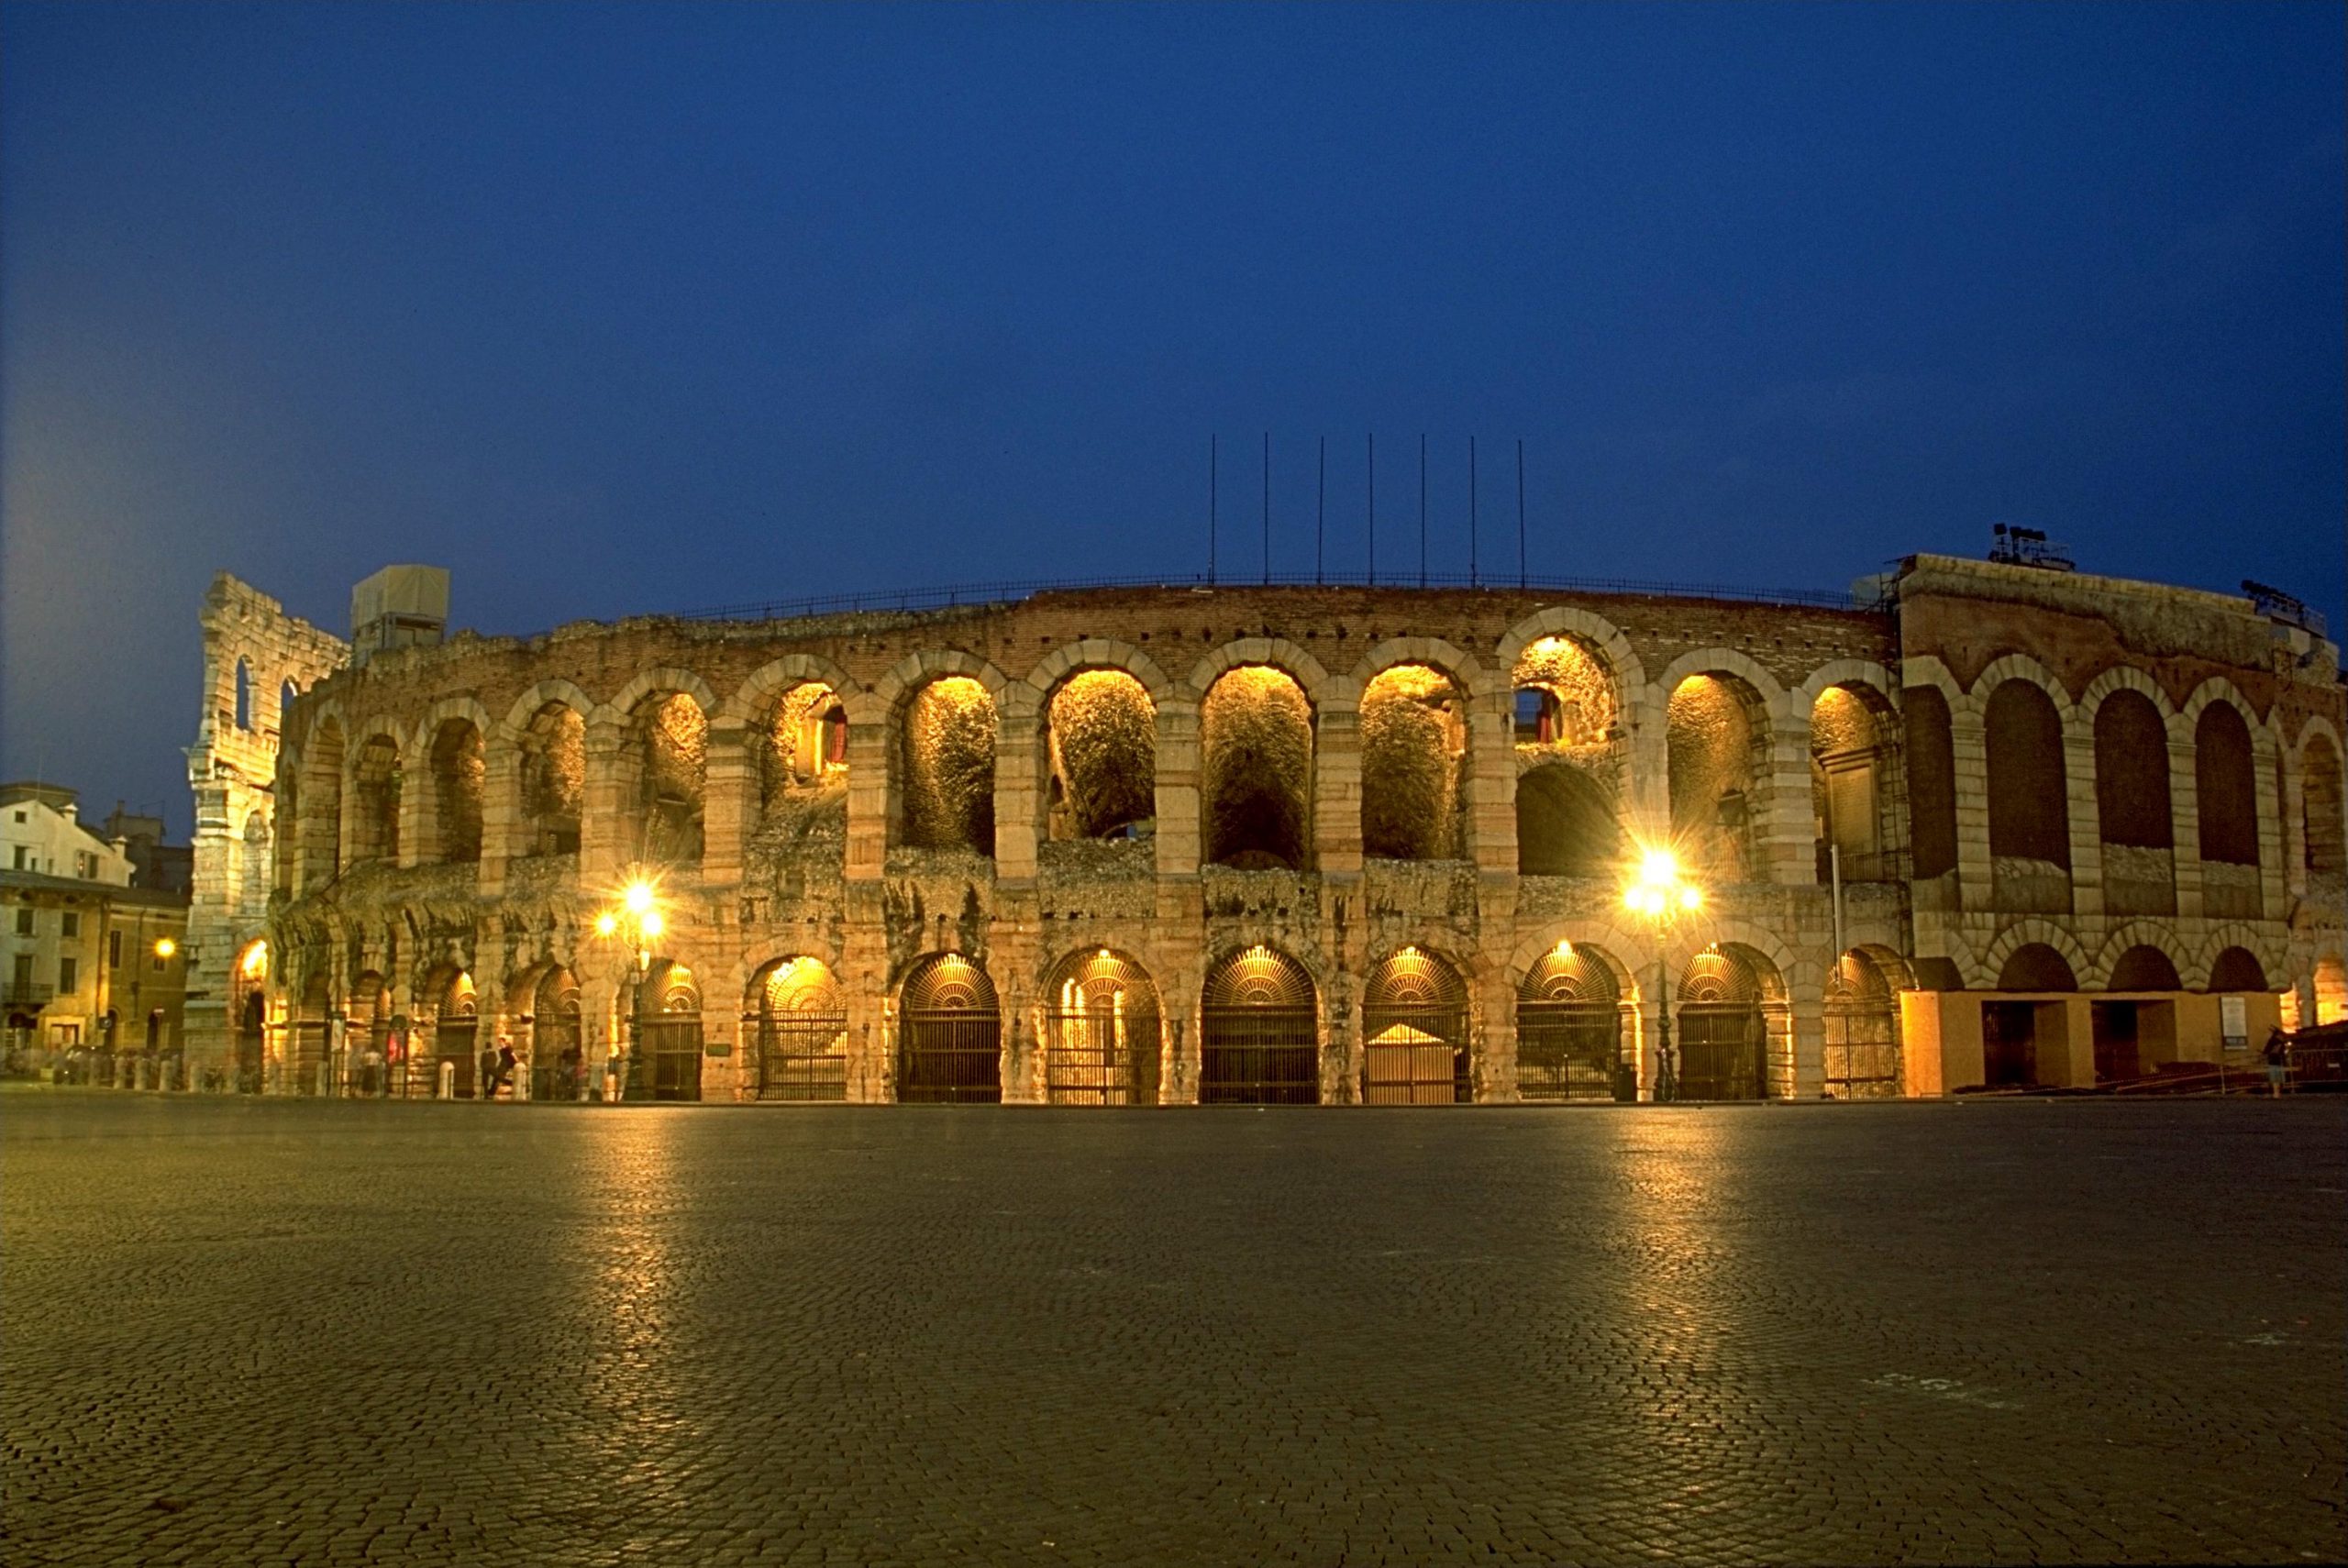 Verona: the Arena at the Gladiators' time